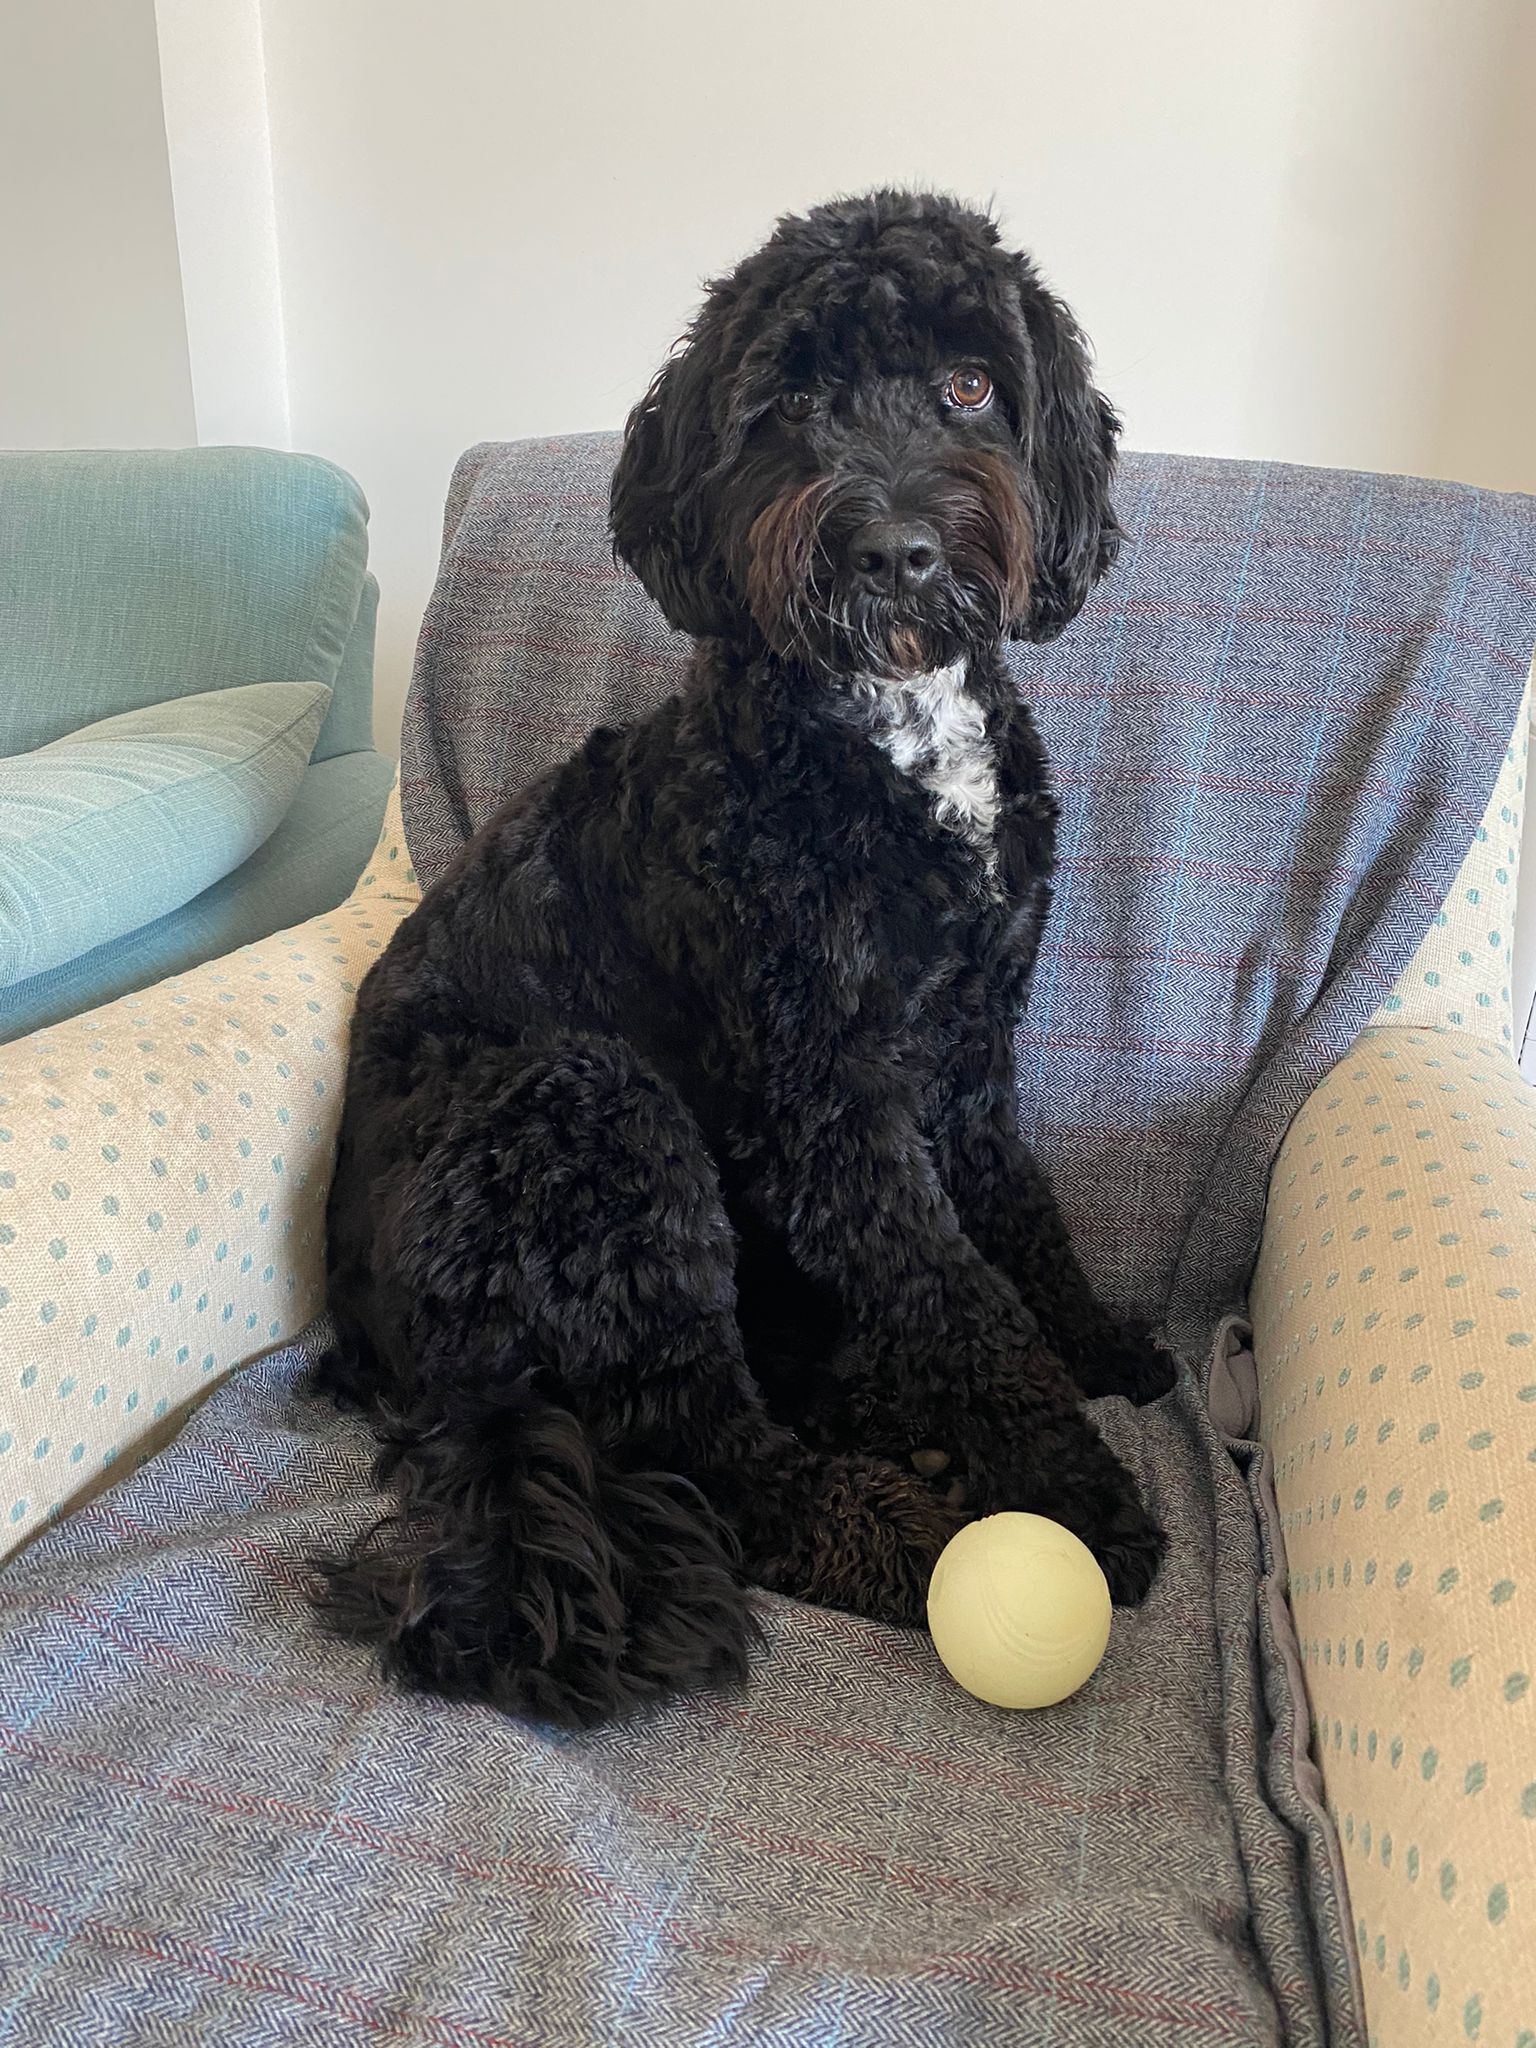 A well-groomed curly dog perched on a spotty chair with a little yellow ball by their paw.